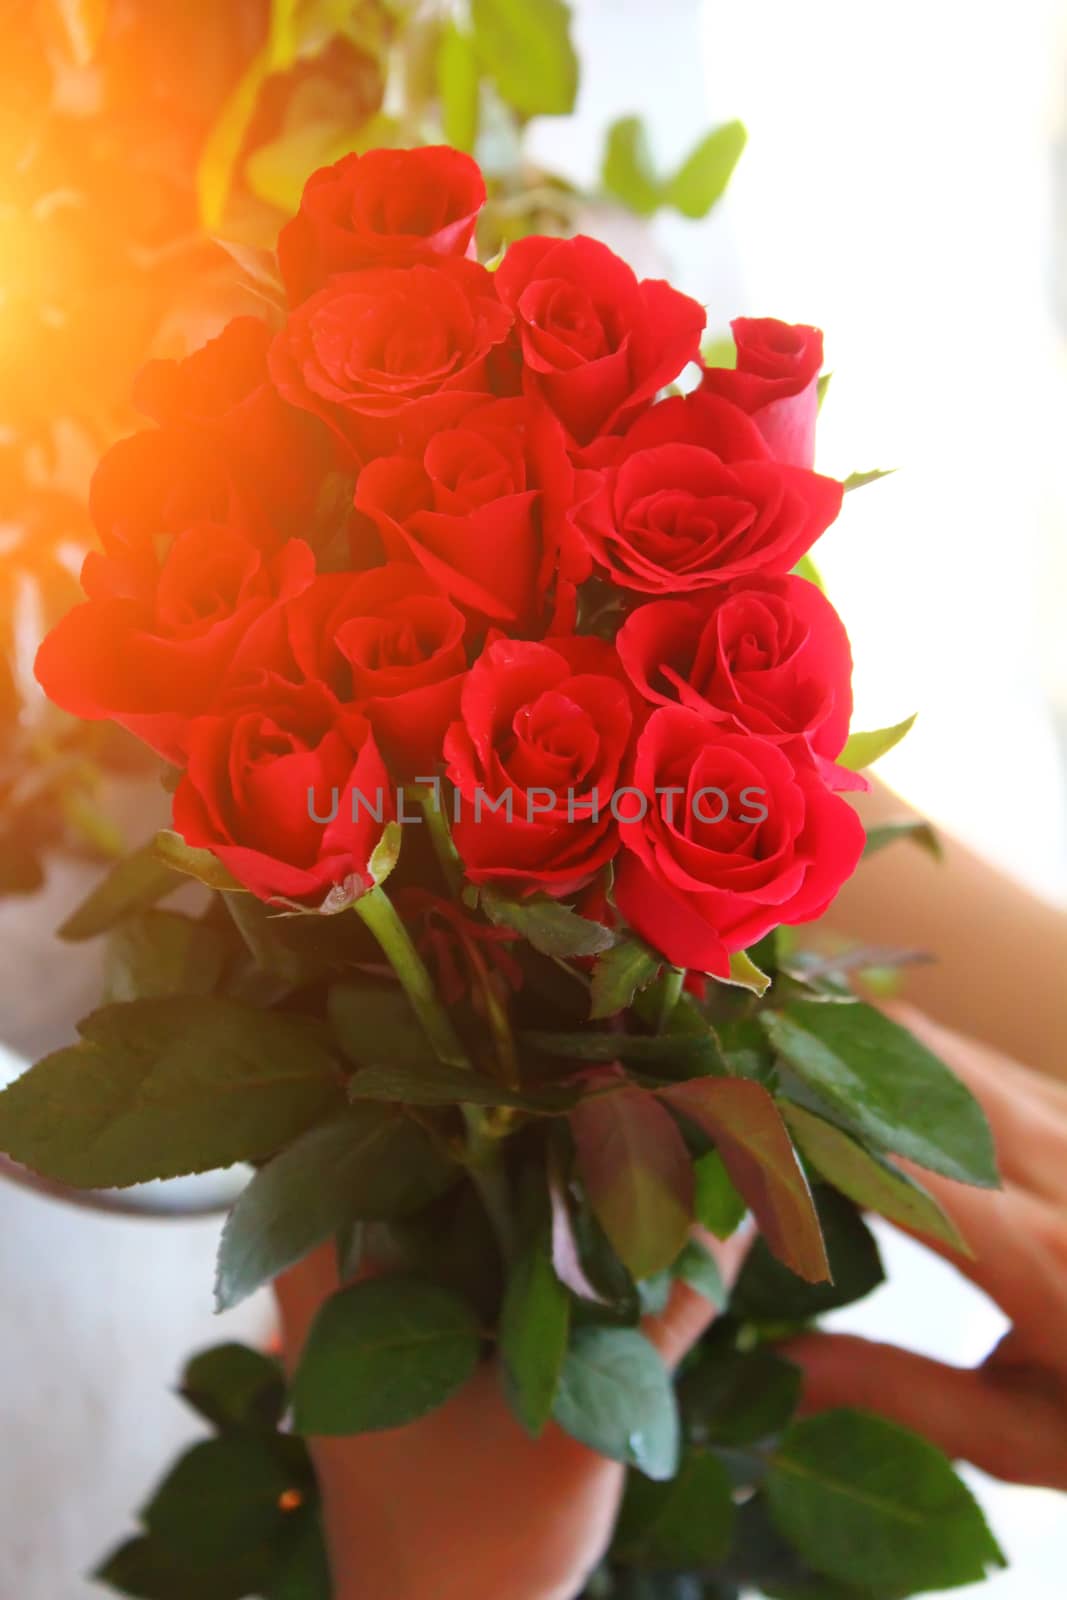 The beautiful bouquet of roses